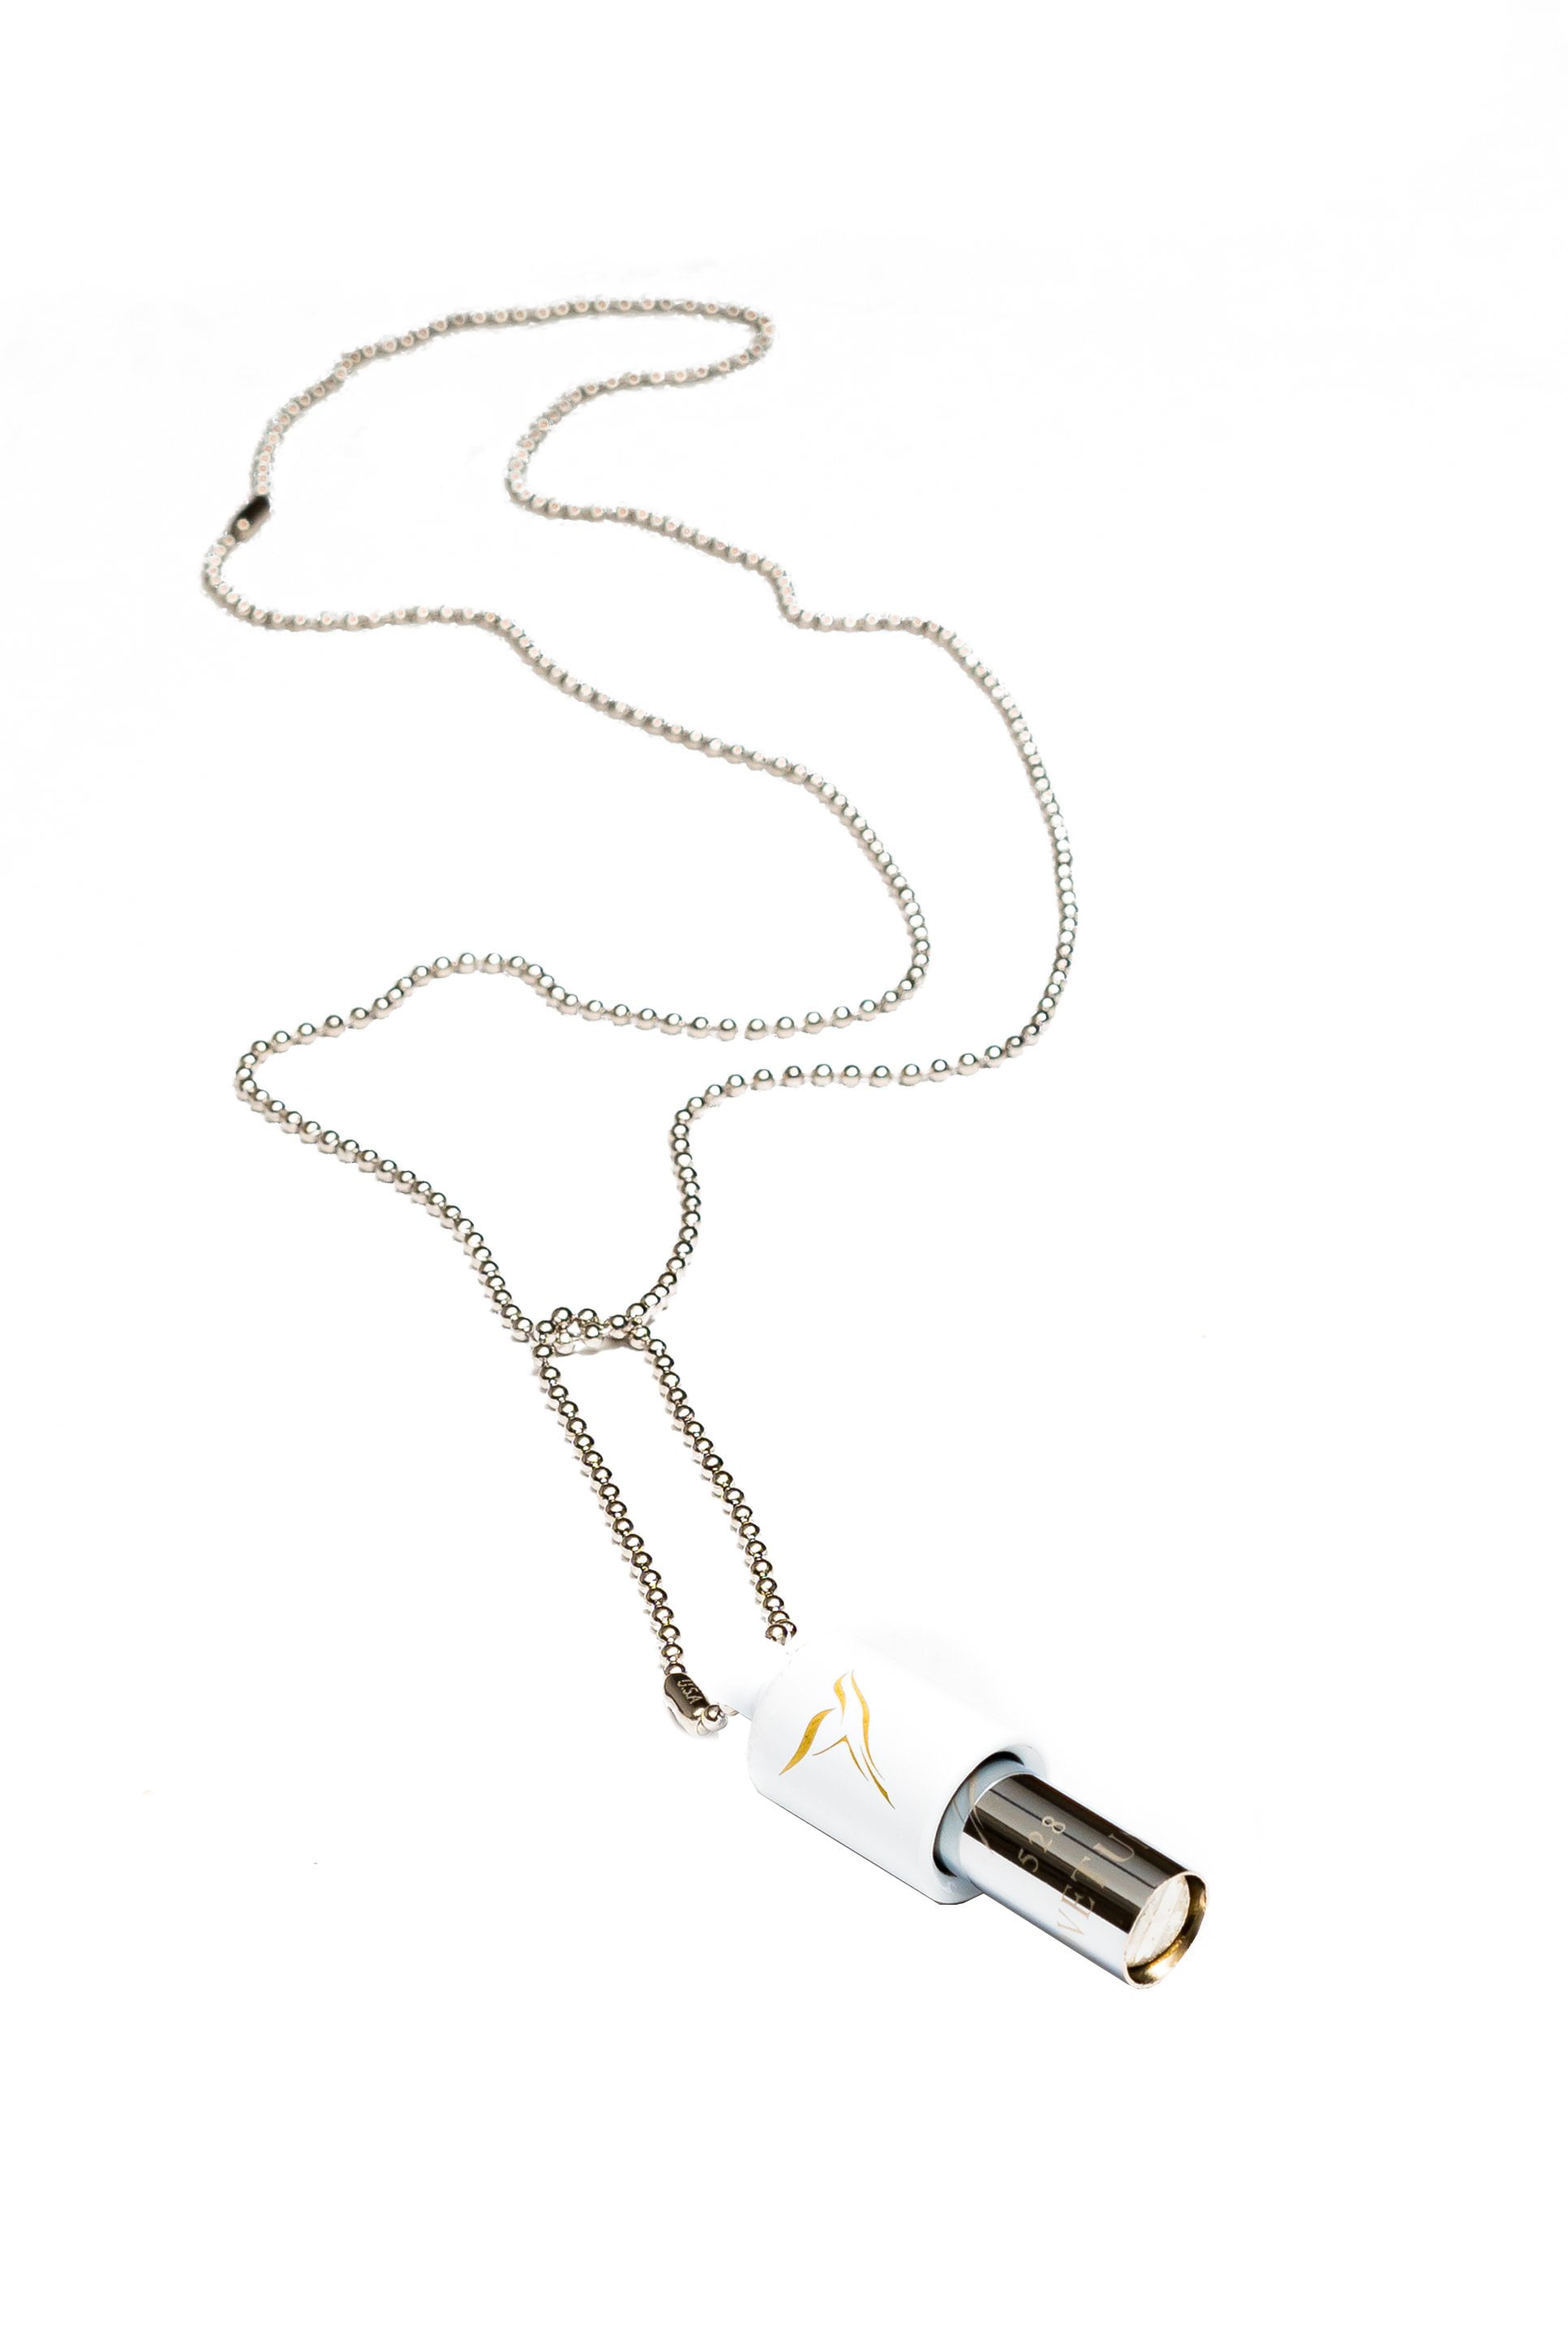 LOVETUNER White Meditation Tuning Necklace 528 hz Frequency of 